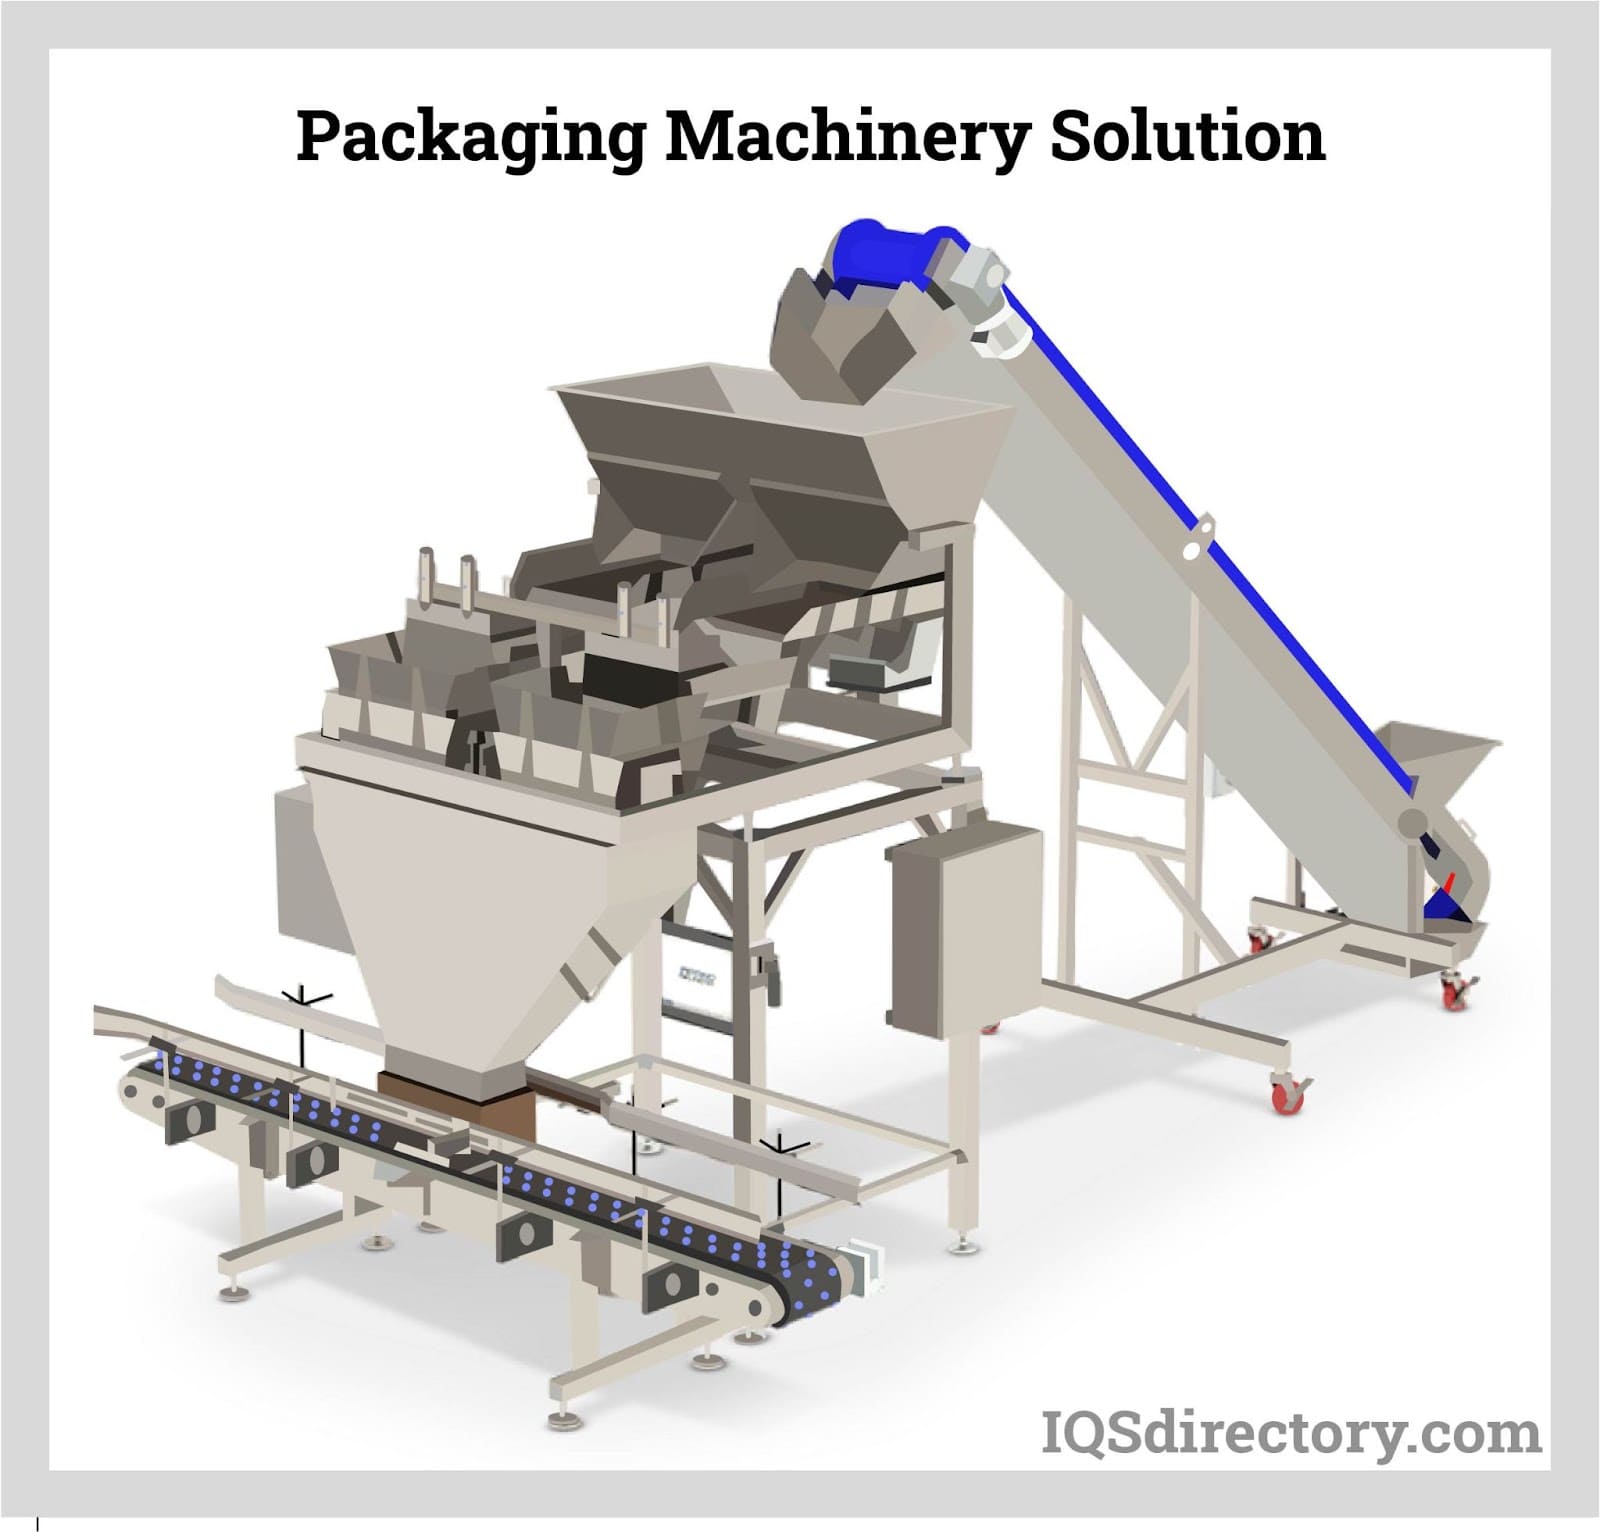 Packaging Machinery Solution